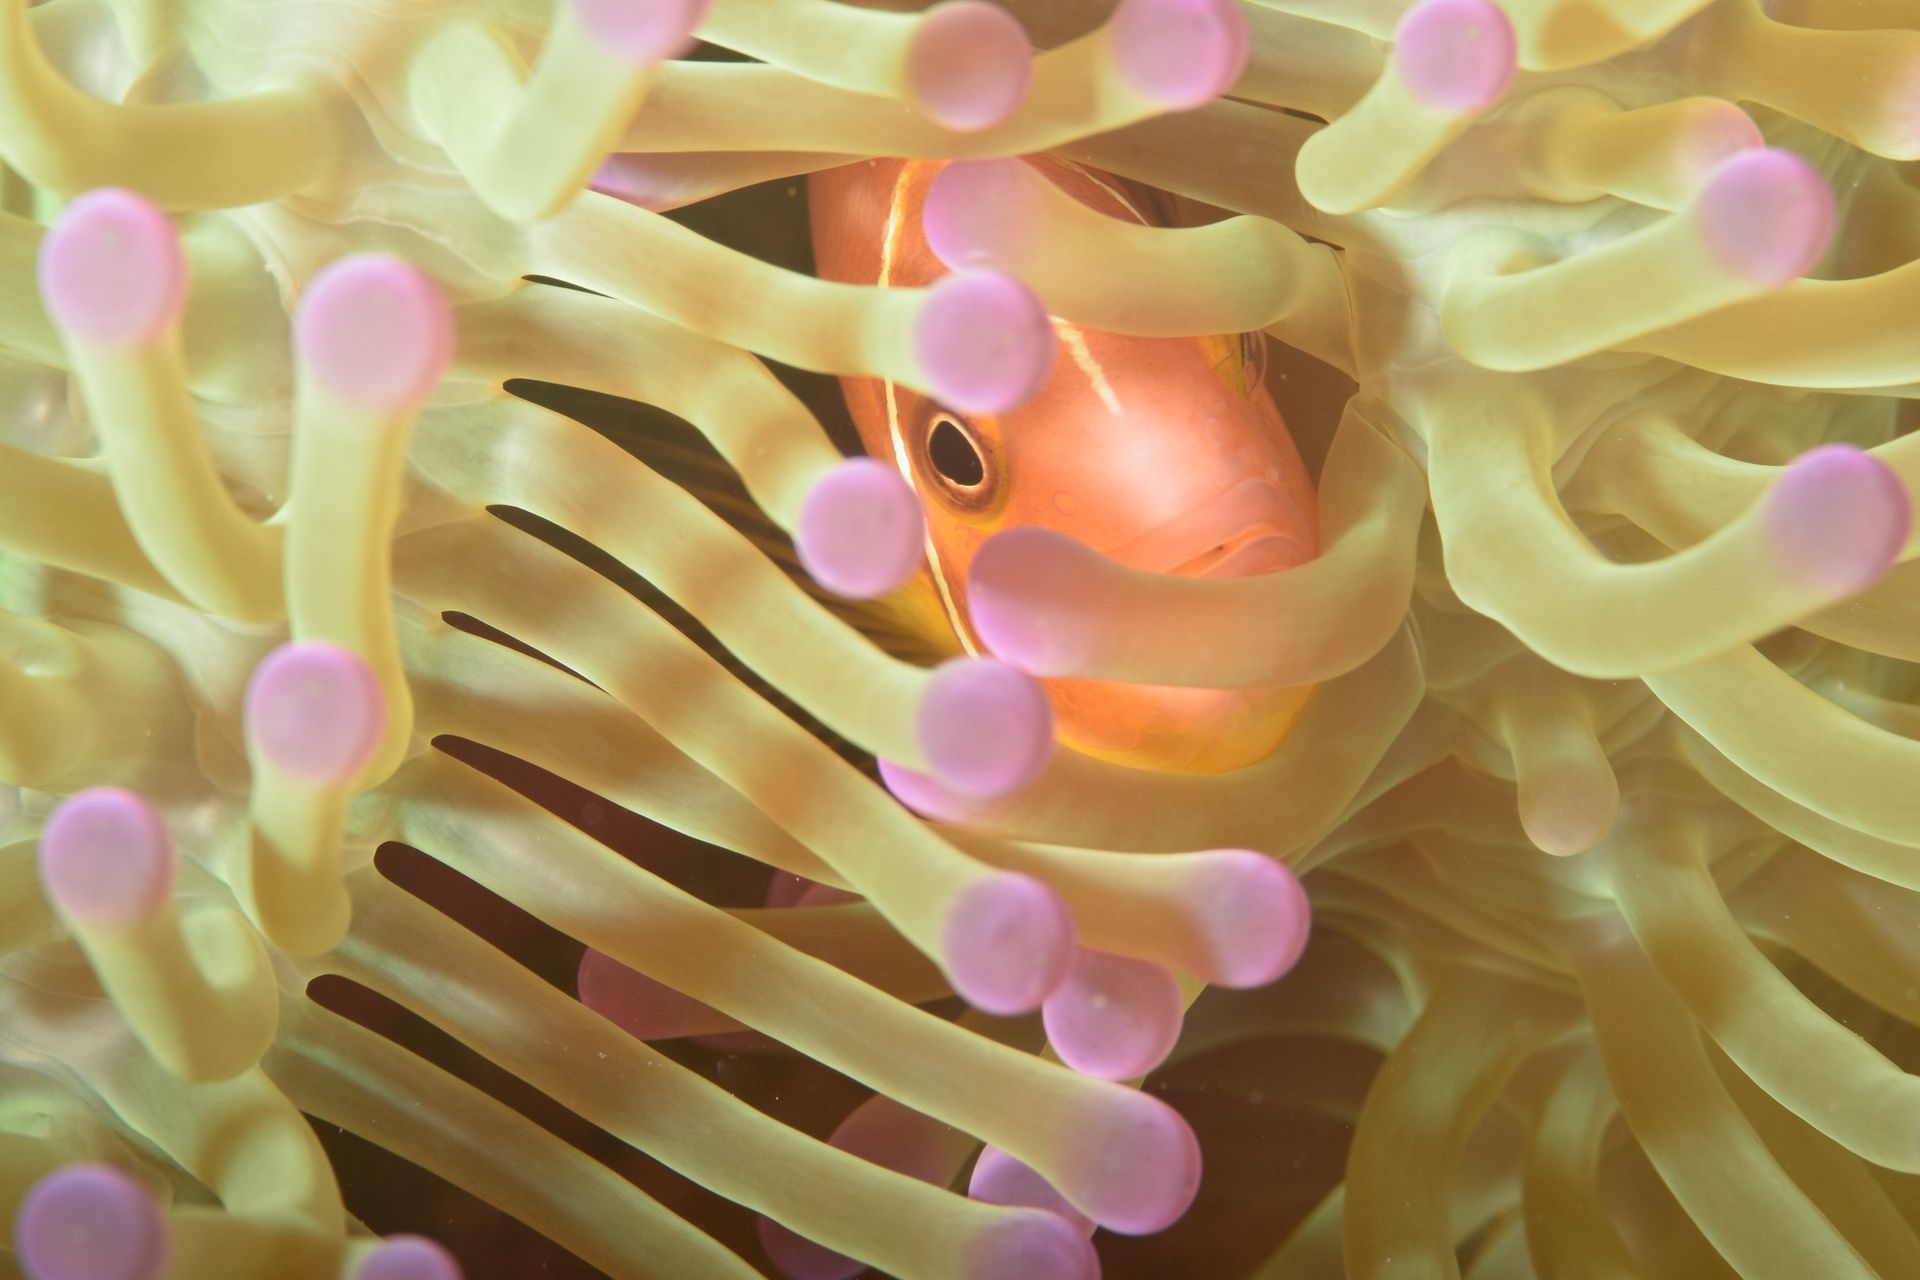 A beautiful and unusual portrayal of an orange clown fish peeping through the  yellow and pink tentacles of an anemone